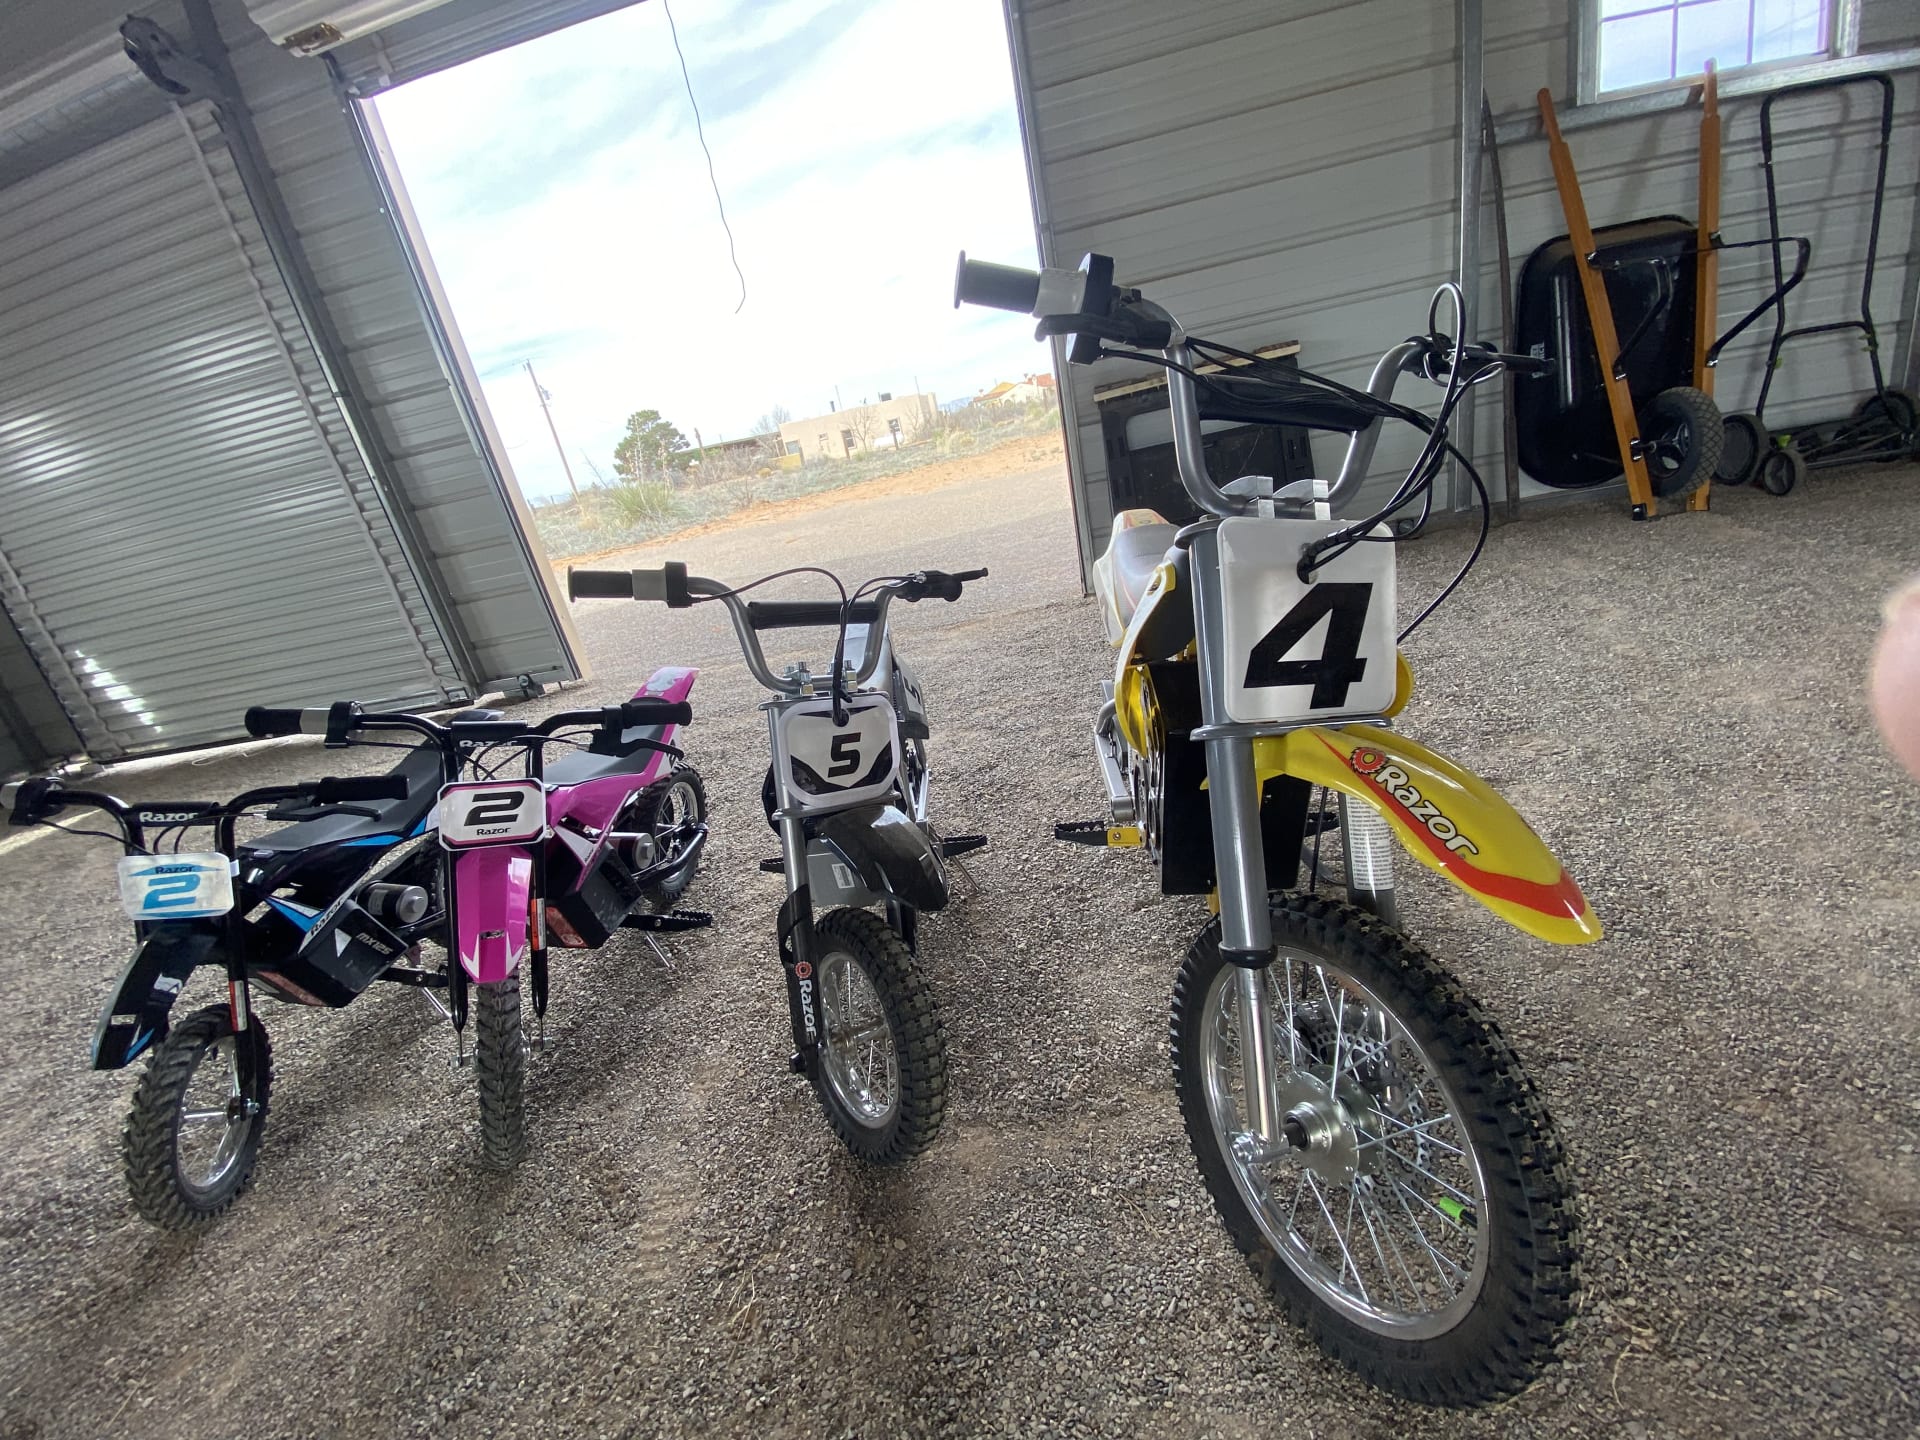 We Offer e-bike rentals and have a 2 acre ranch with trails to ride them!